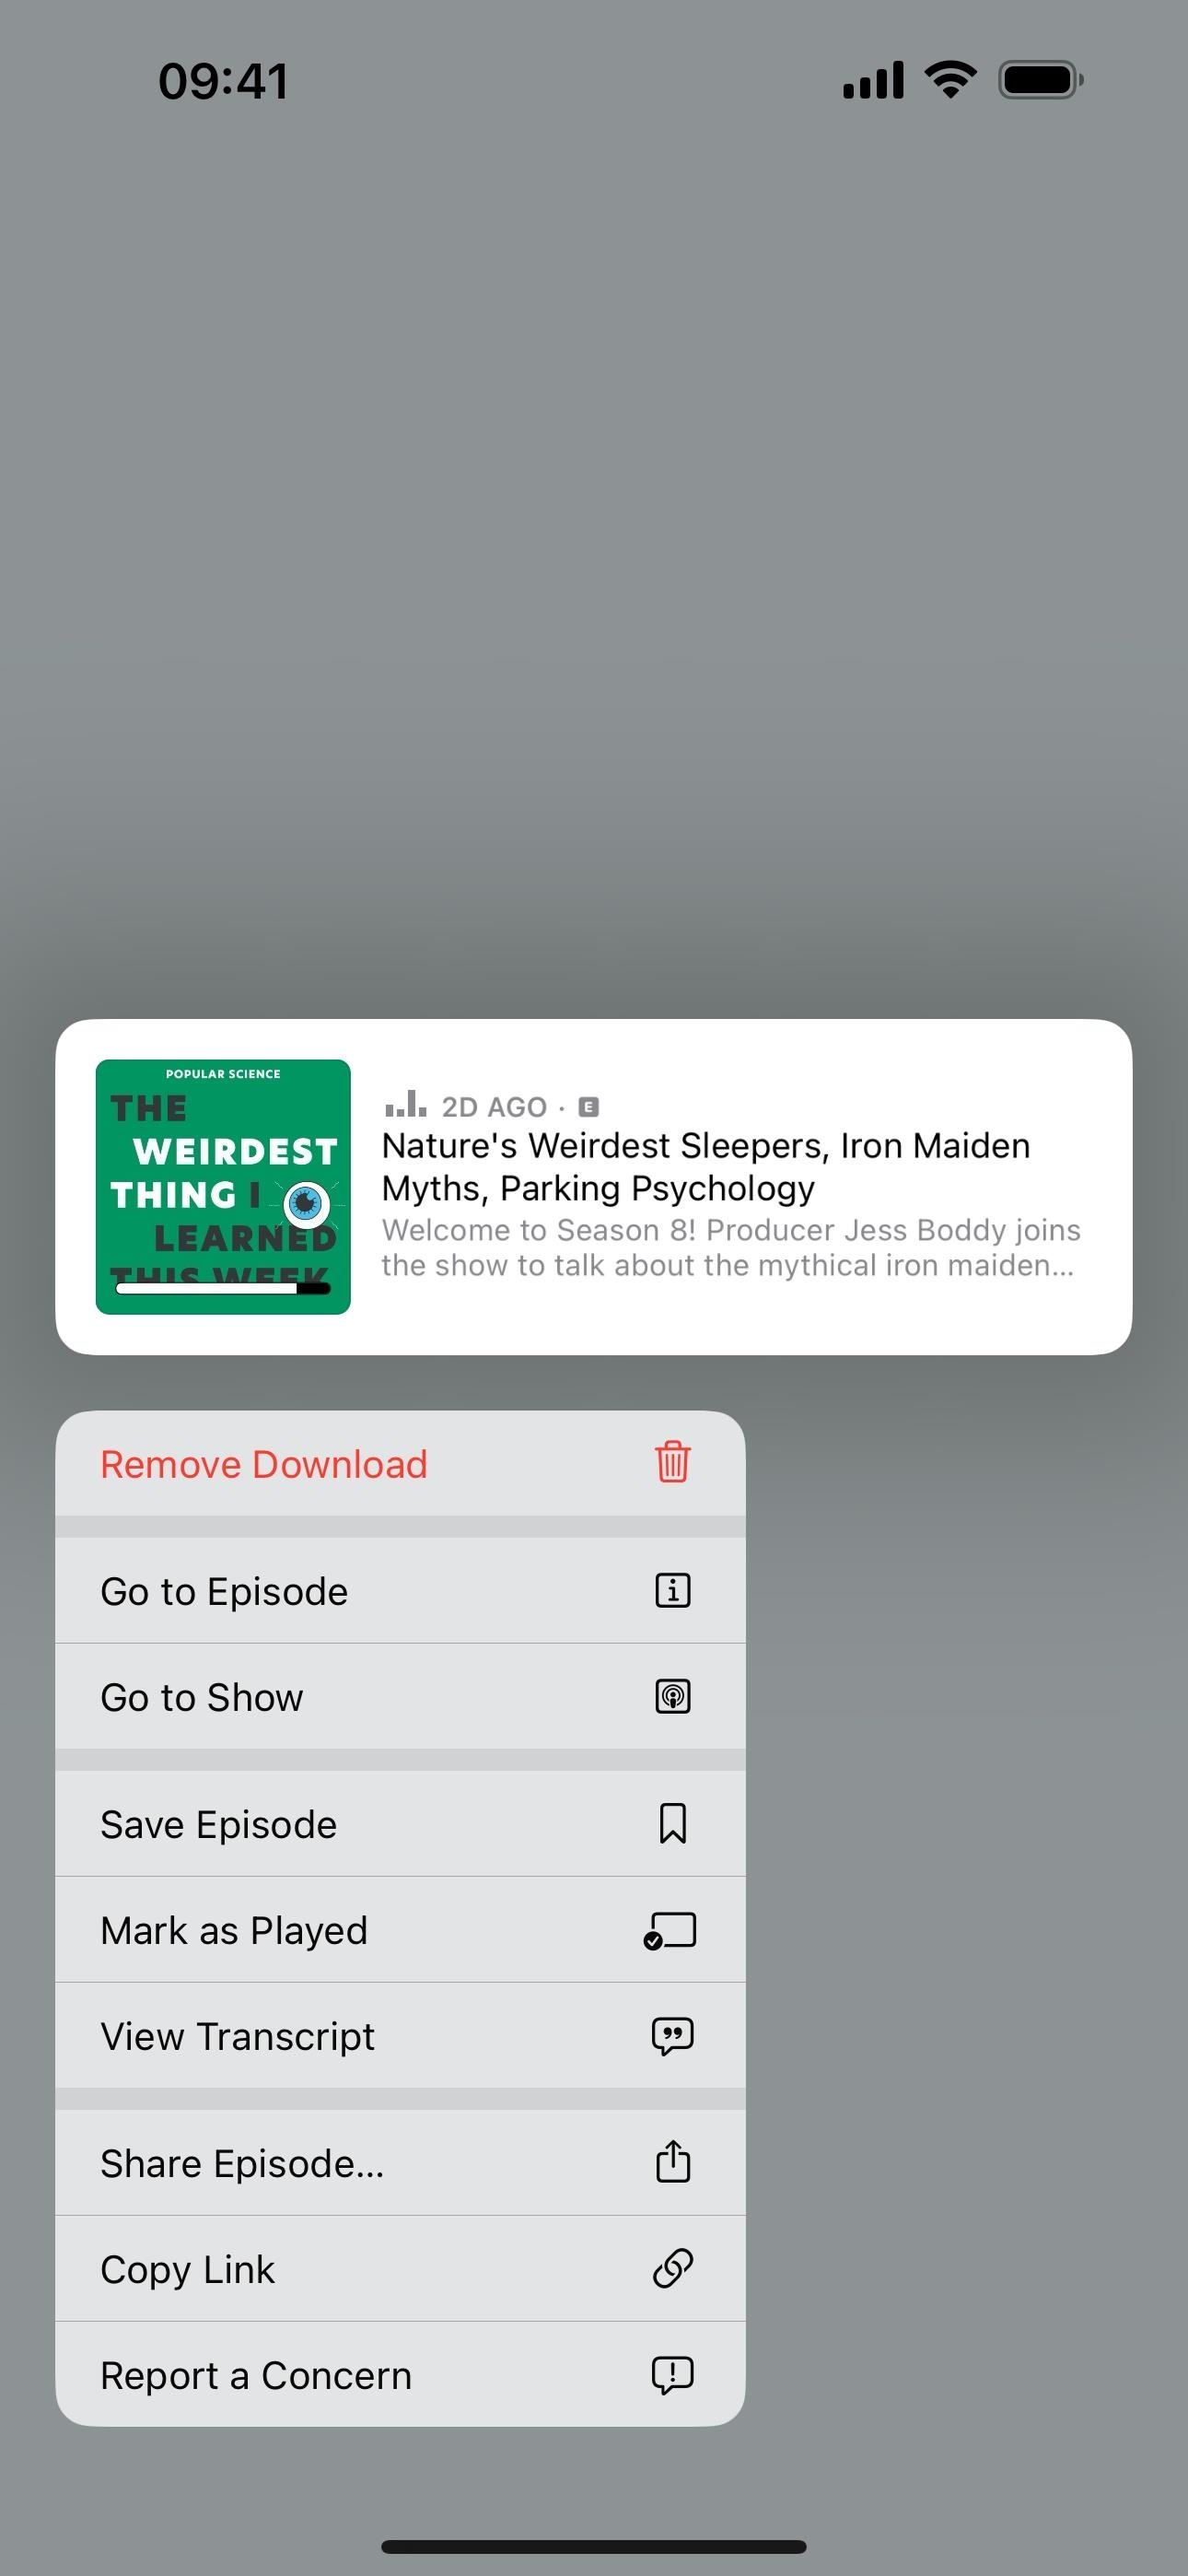 View Podcast Transcripts on Your iPhone to View, Search, and Navigate the Audio